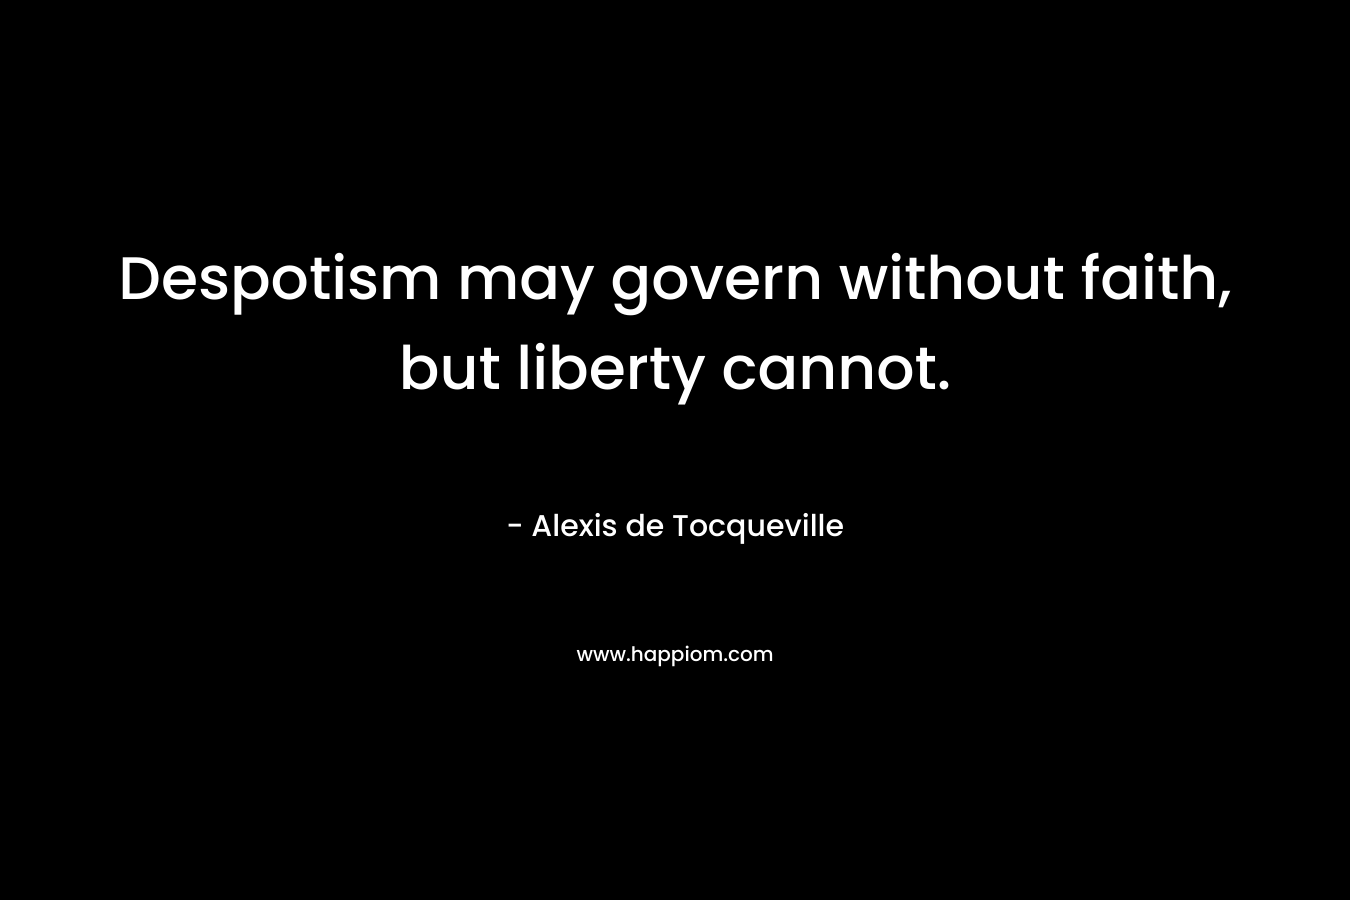 Despotism may govern without faith, but liberty cannot. – Alexis de Tocqueville